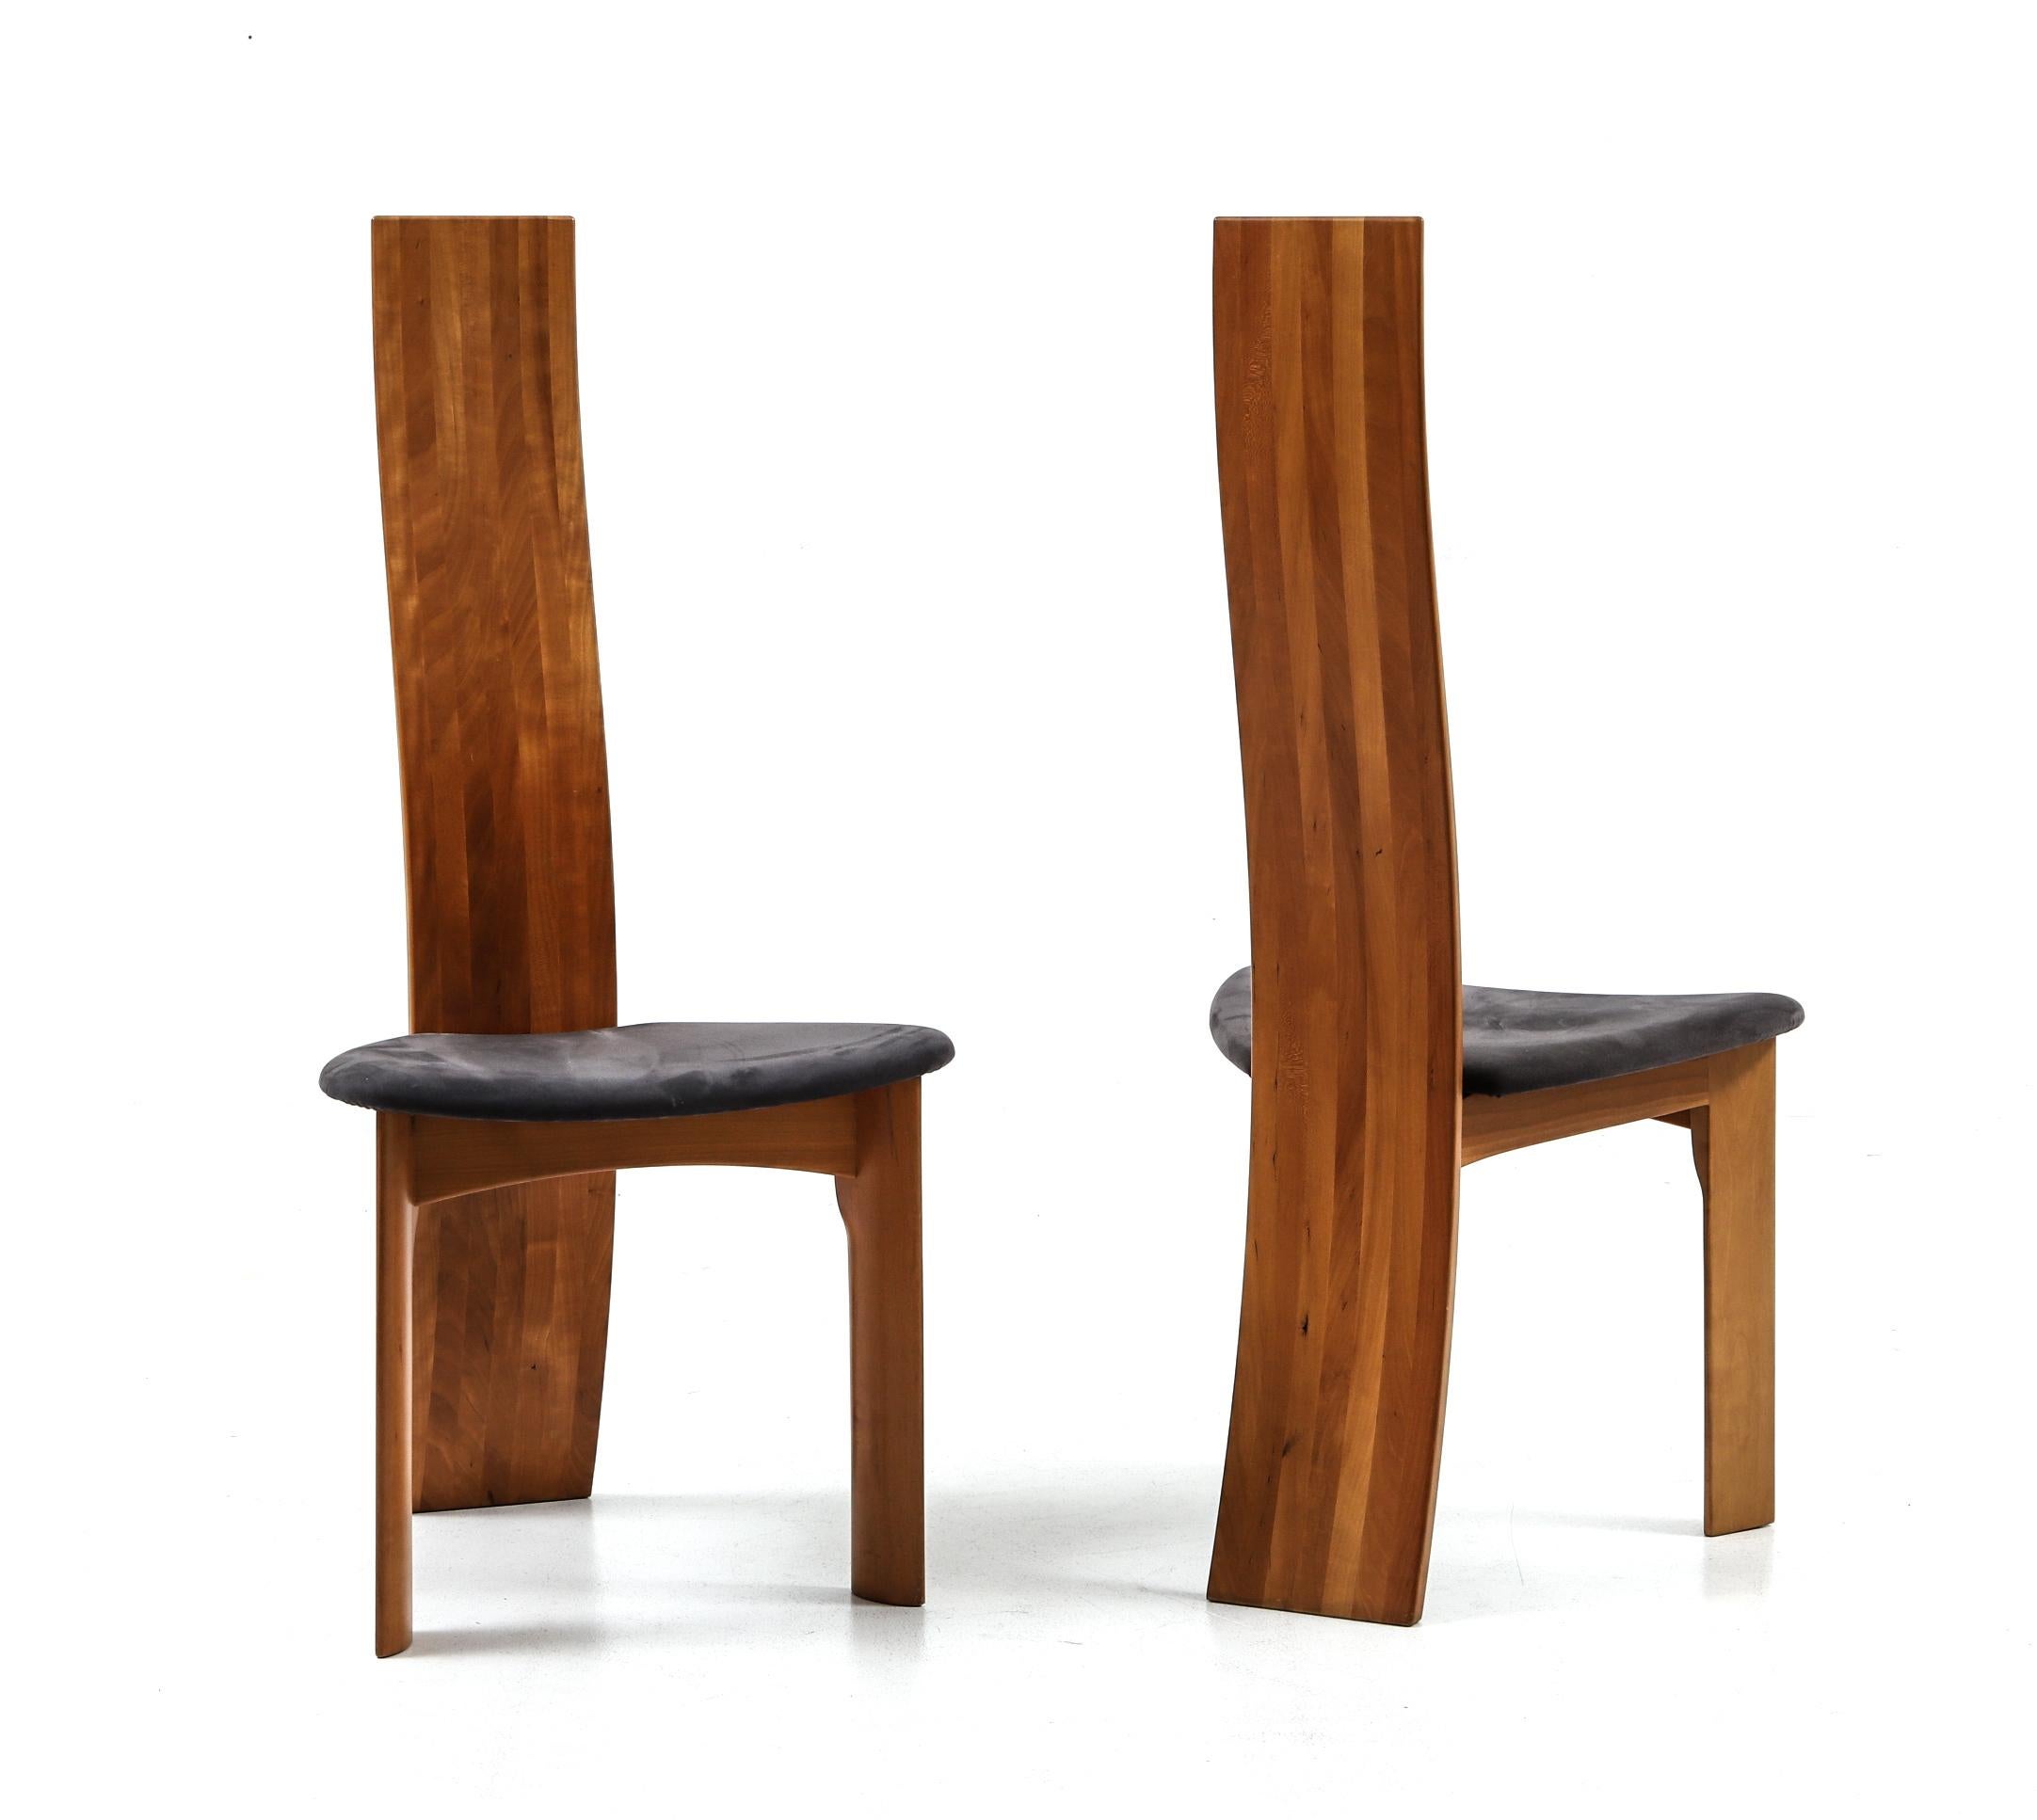 A set of six Danish cherrywood dining chairs. Designed 1970 by Bob og Dries van den Bergh for Tranekær Mobler. (Suitable table also available visible on the last two pictures)
Three leg construction with leather seats and tall curved backs.
Set of